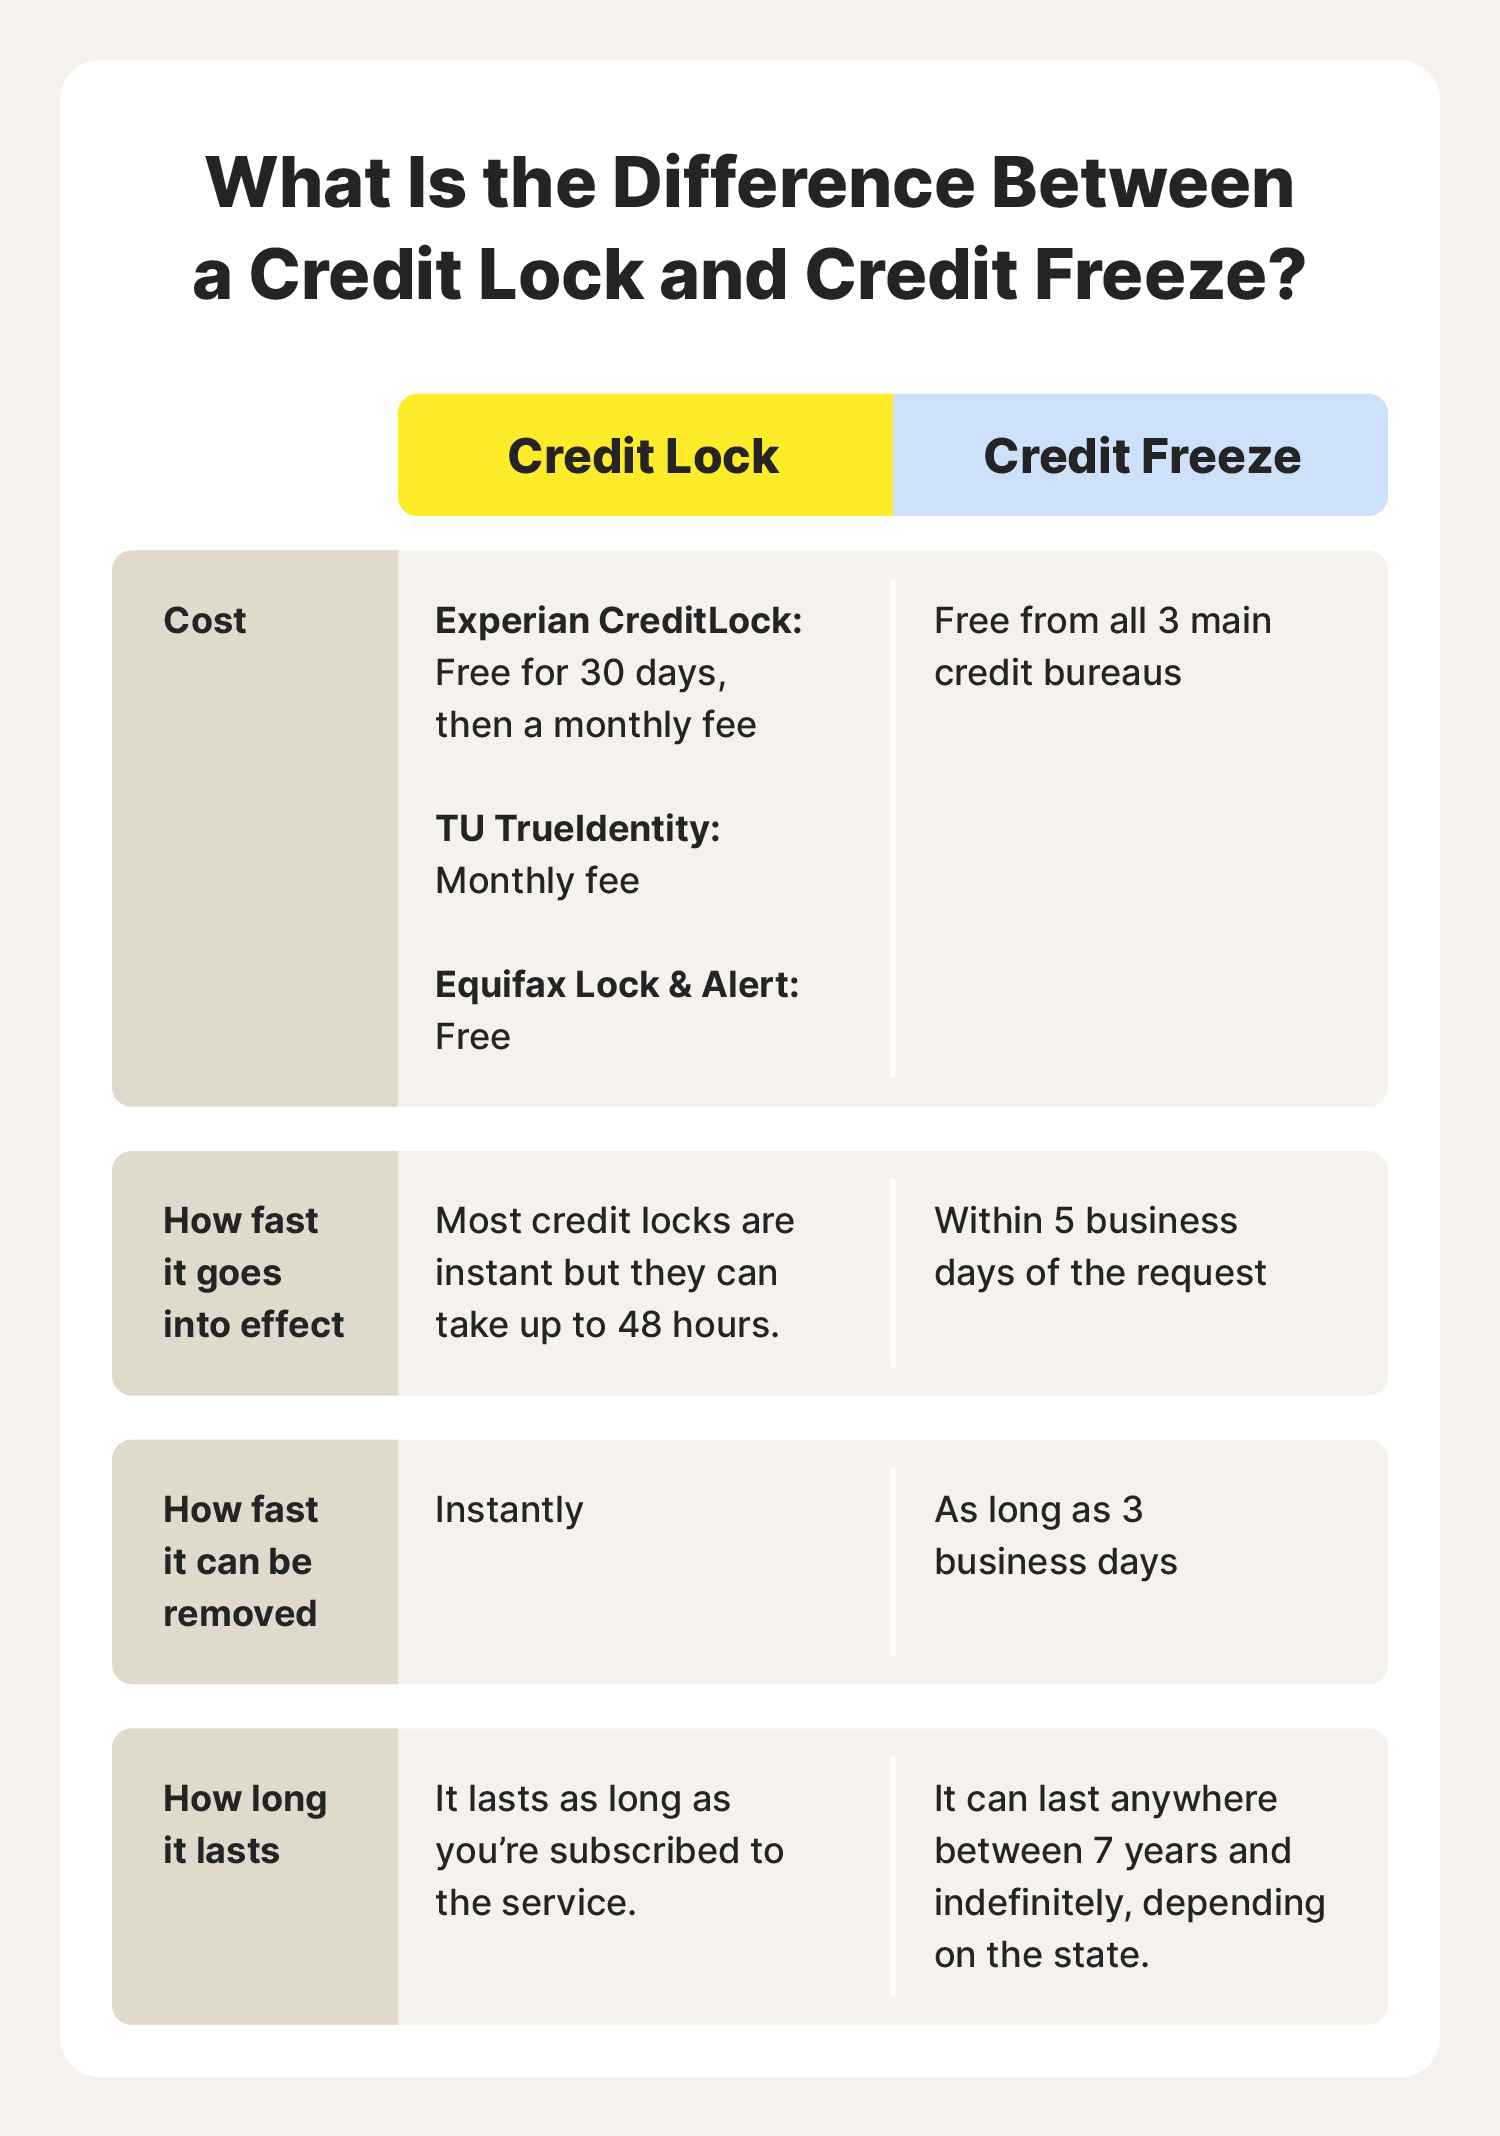 Illustrated chart covering the differences between a credit lock vs. credit freeze, including cost and how long it lasts.